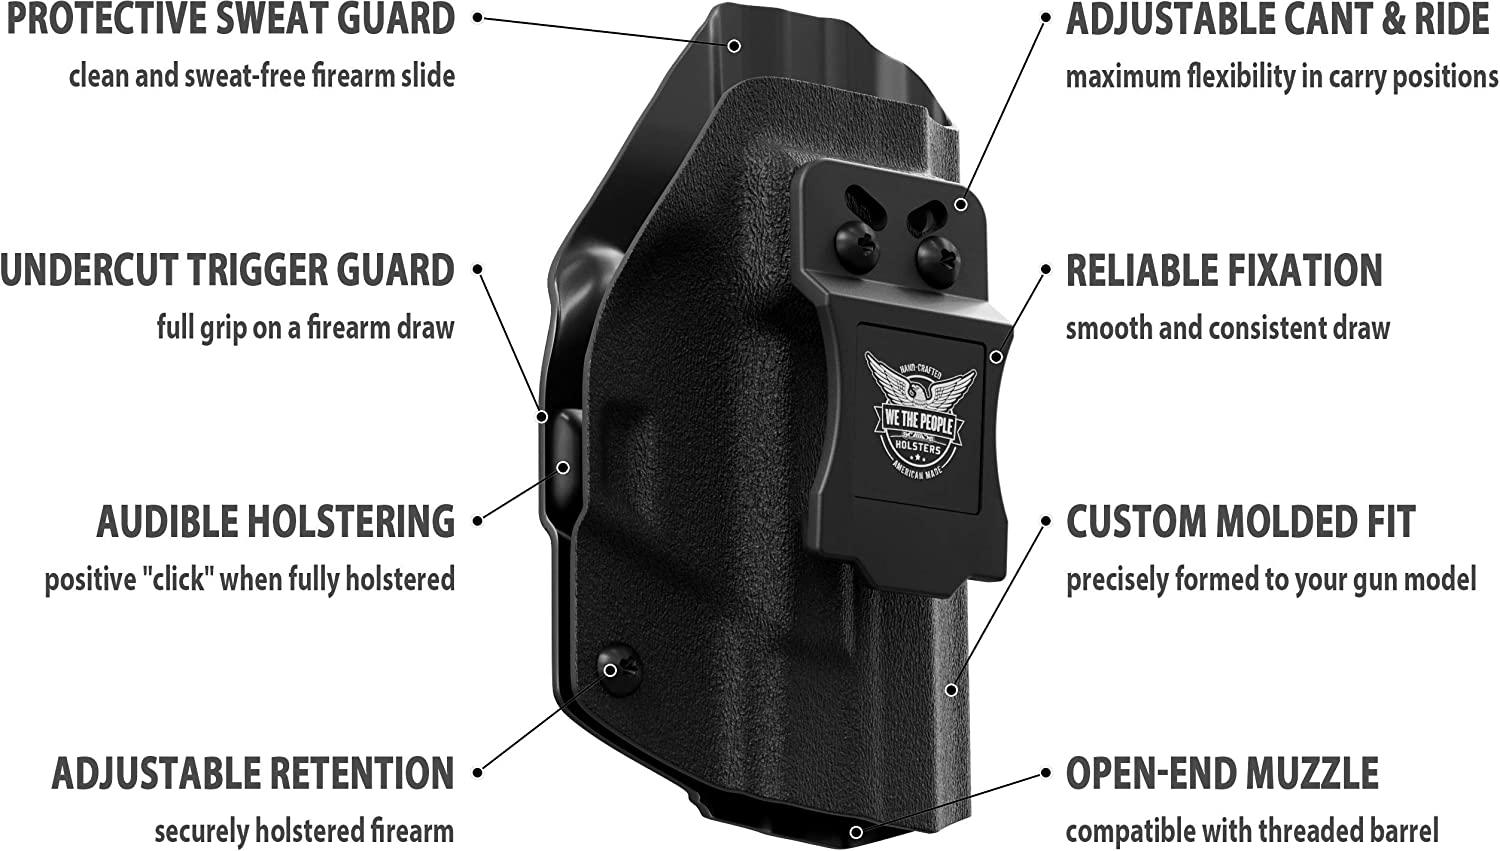 We The People Holsters - Black - Inside Waistband Concealed Carry - IWB  Kydex Holster - Adjustable RideCantRetention Right Hand Glock 1919X 23 32  45 Gen 3-4-5